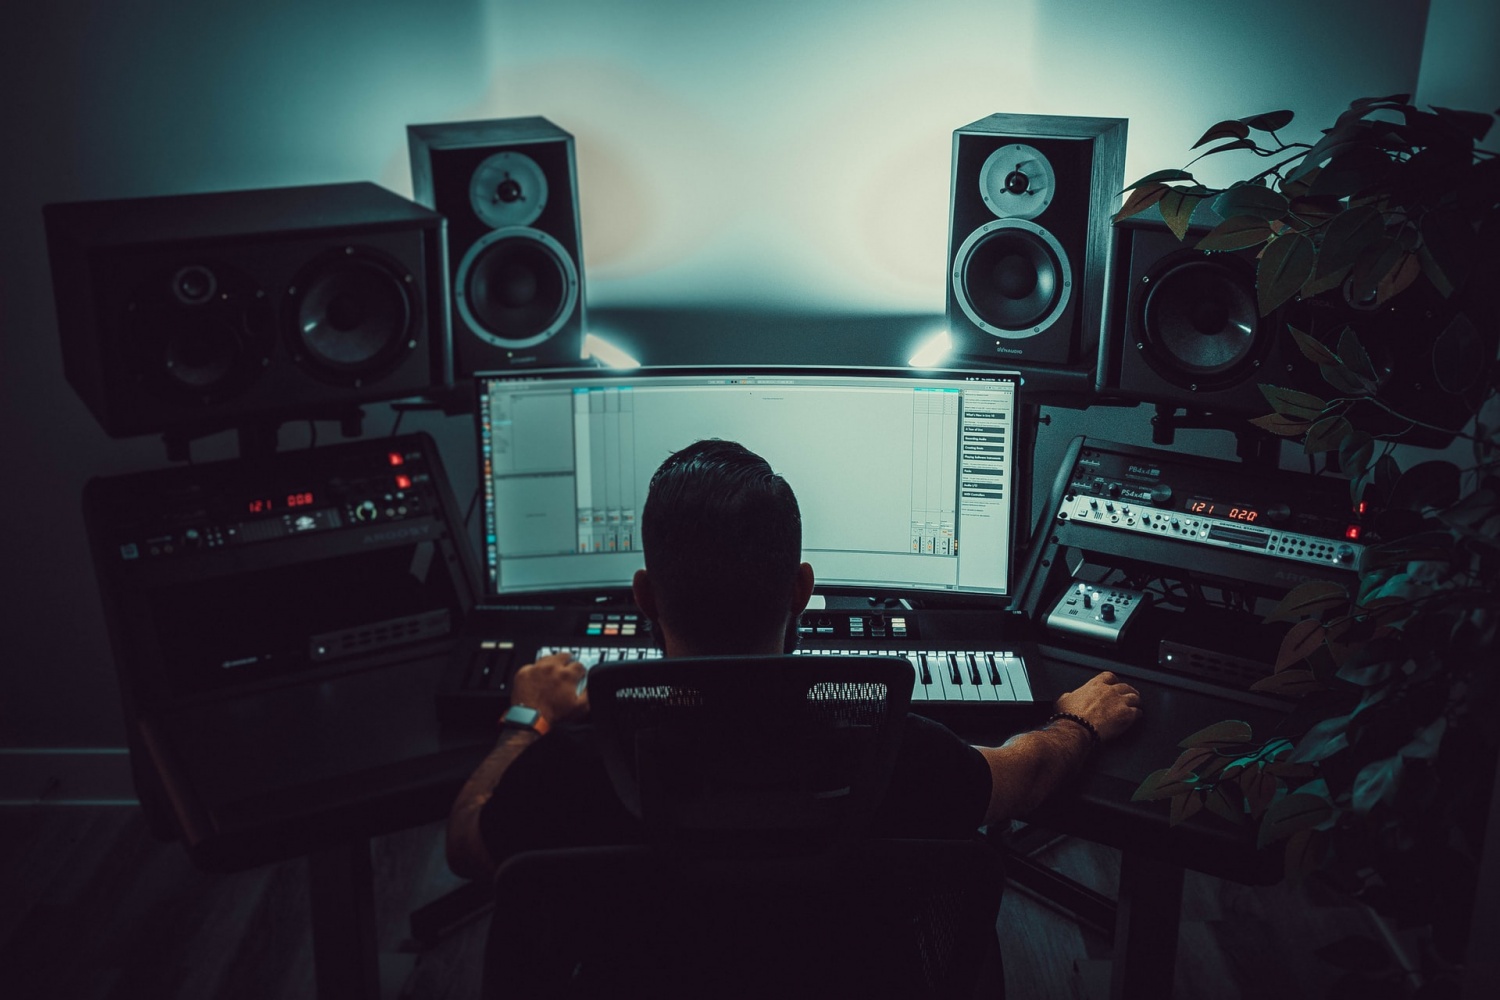 Are You An Aspiring Music Producer? Here Are Some Useful Tips